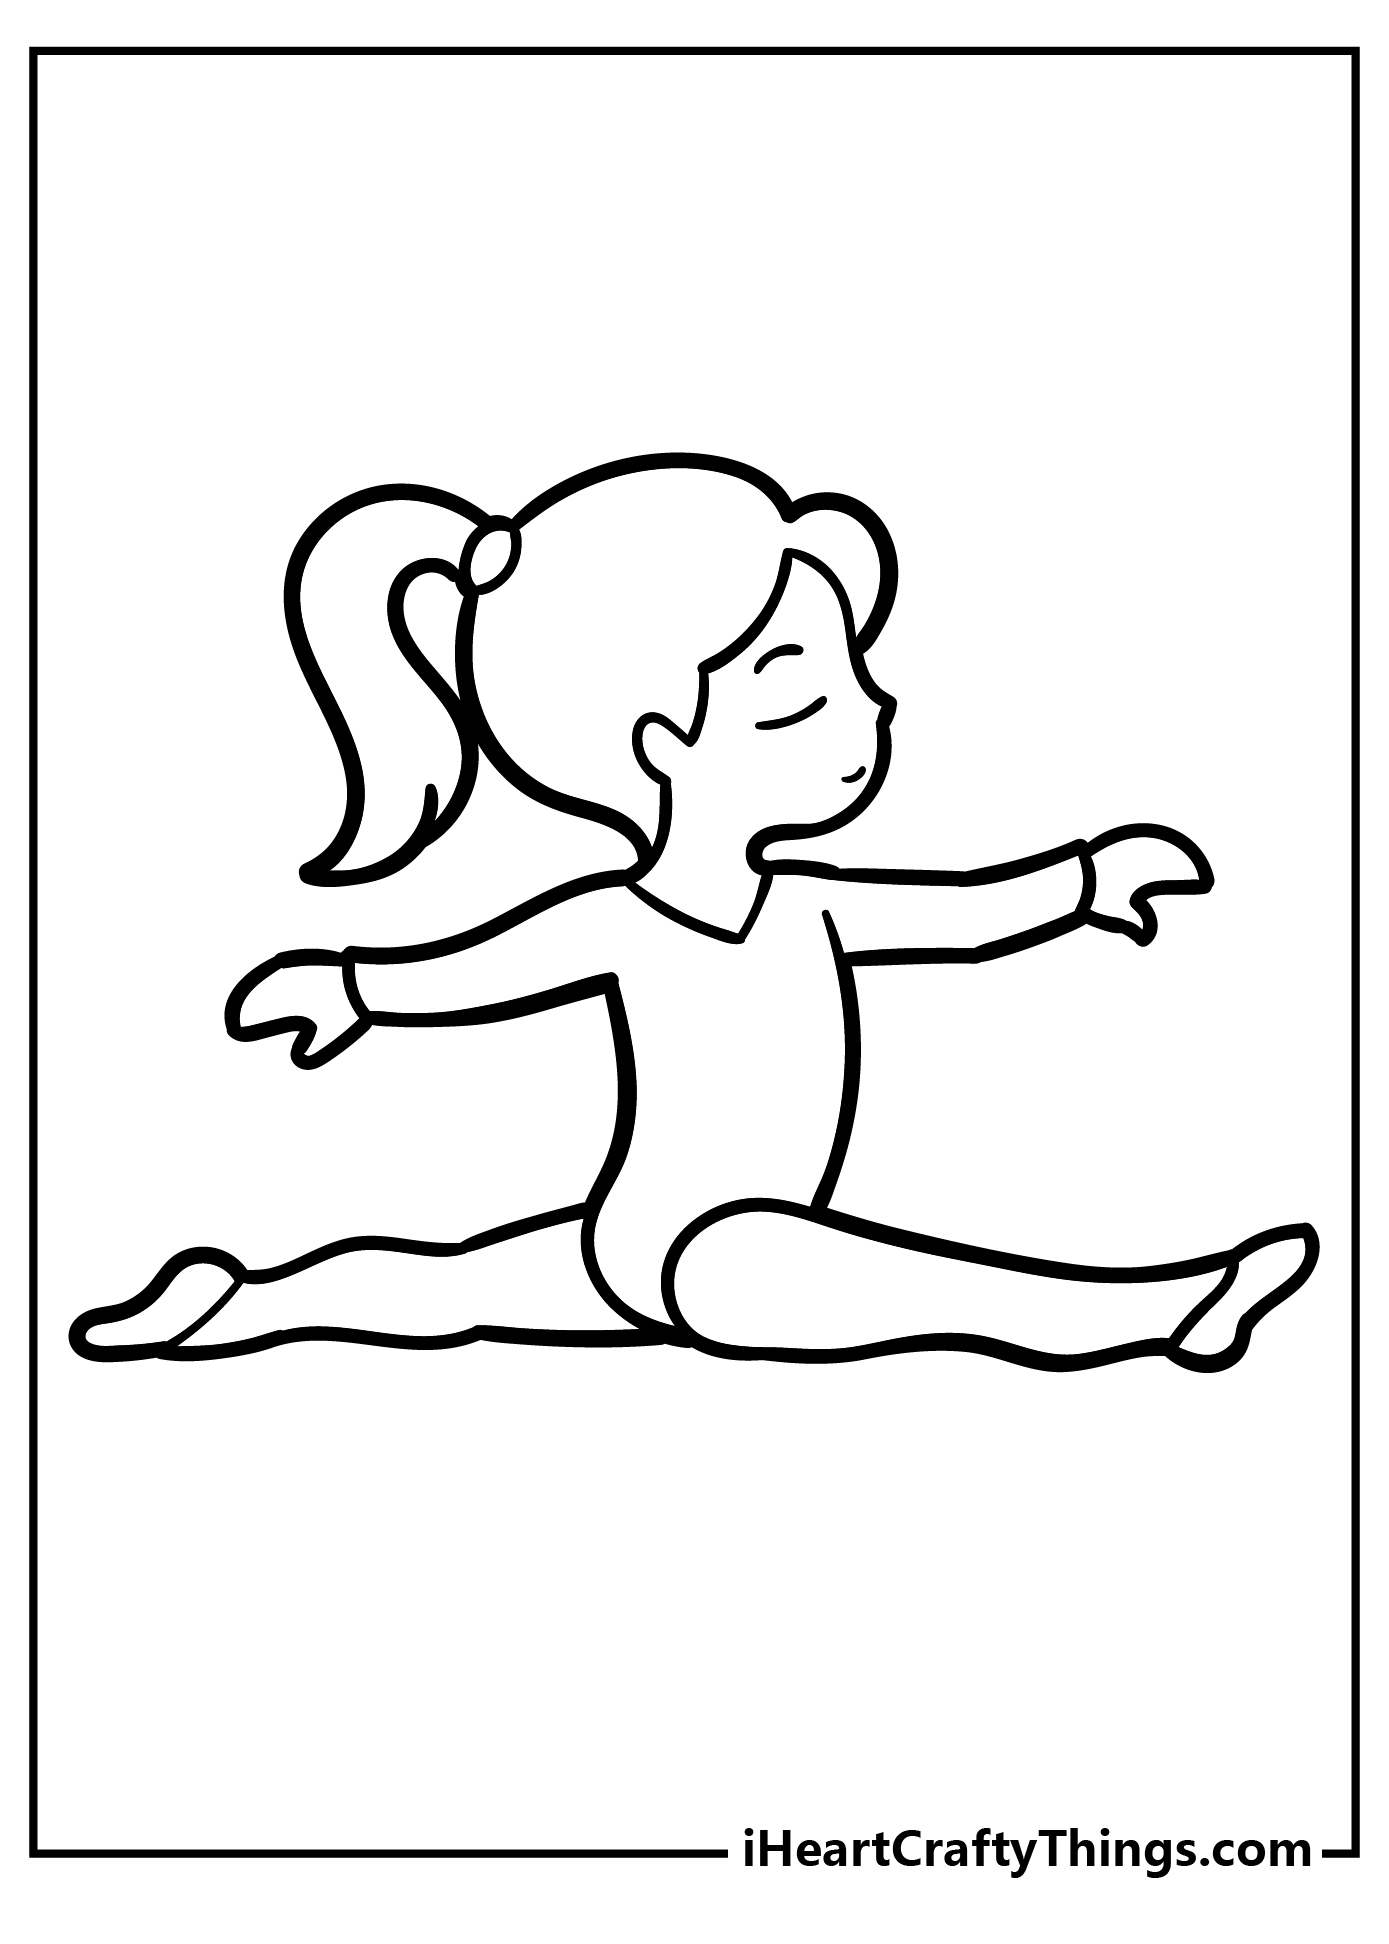 Printable Gymnastics Coloring Pages Updated 20